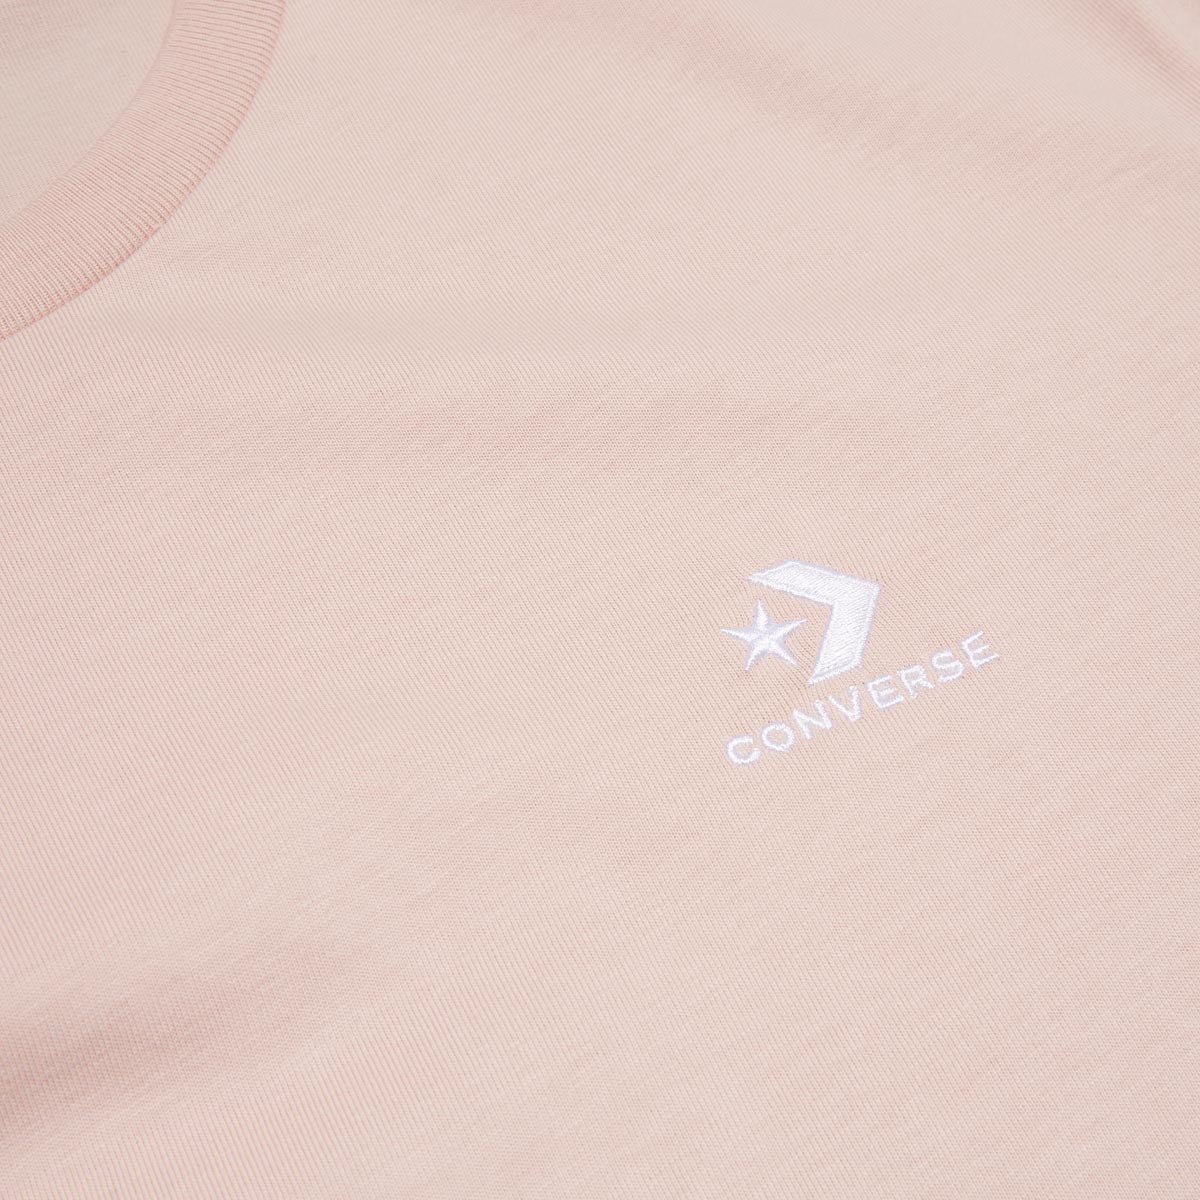 Converse Go-to Embroidered Star Chevron T-Shirt - Pink Sage image 2